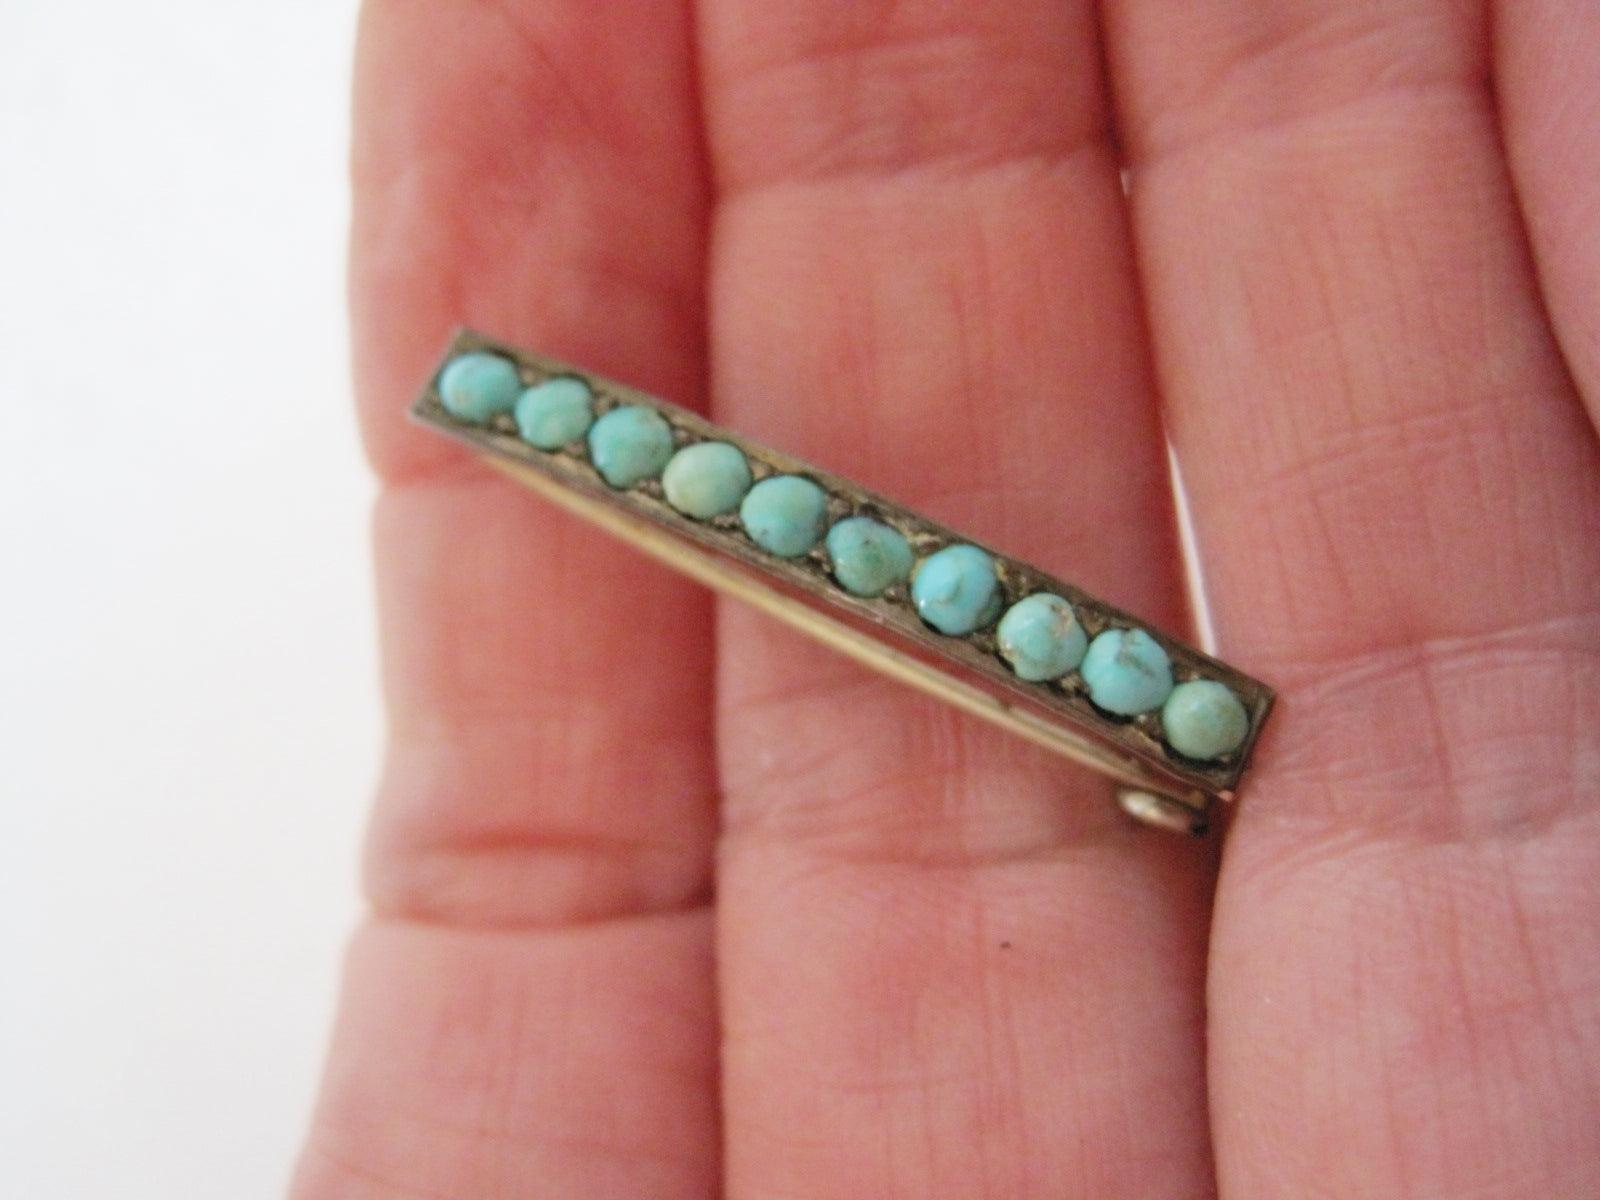 Antique Victorian Silver and Turquoise Bar Brooch or Pin - Anteeka